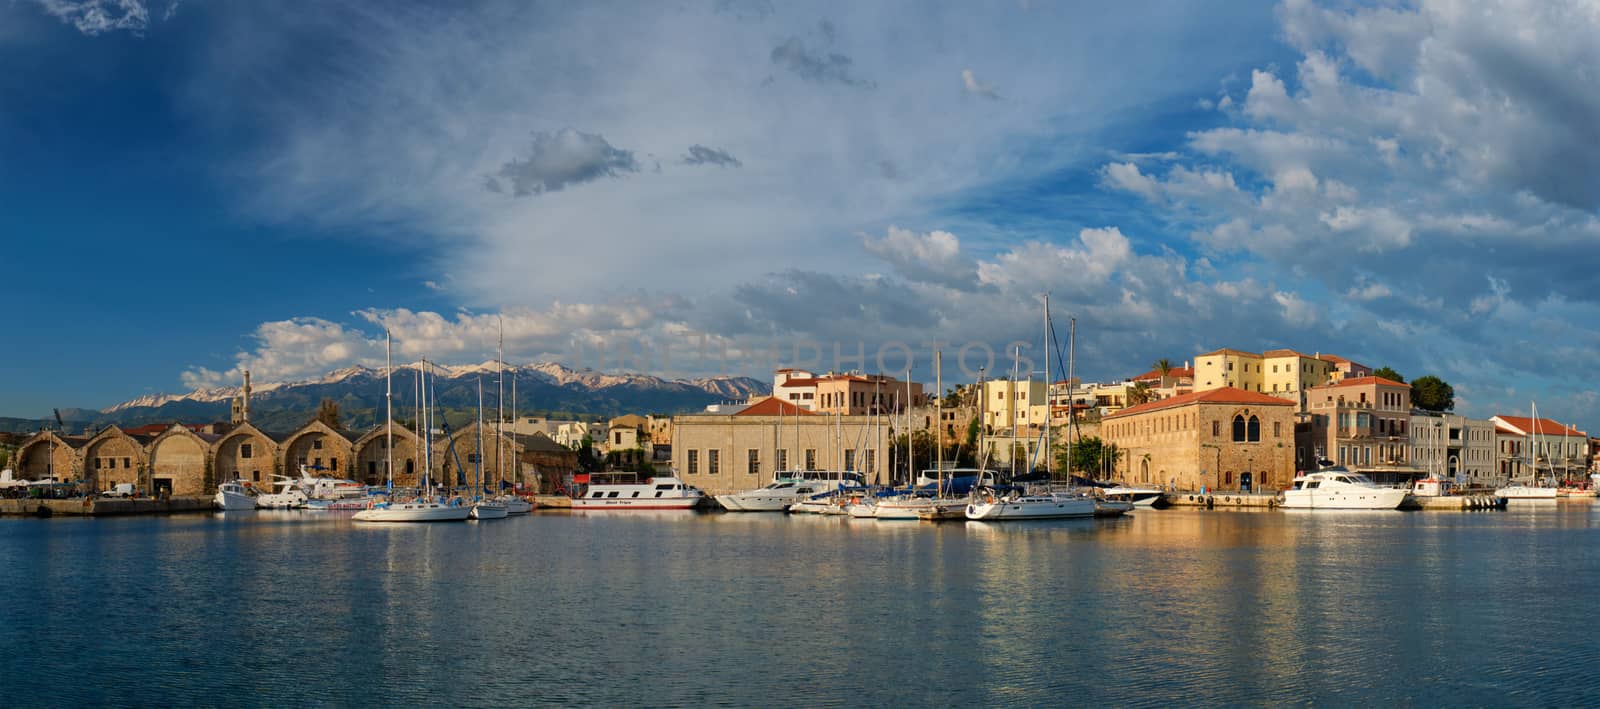 Yachts and boats in picturesque old port of Chania, Crete island. Greece by dimol